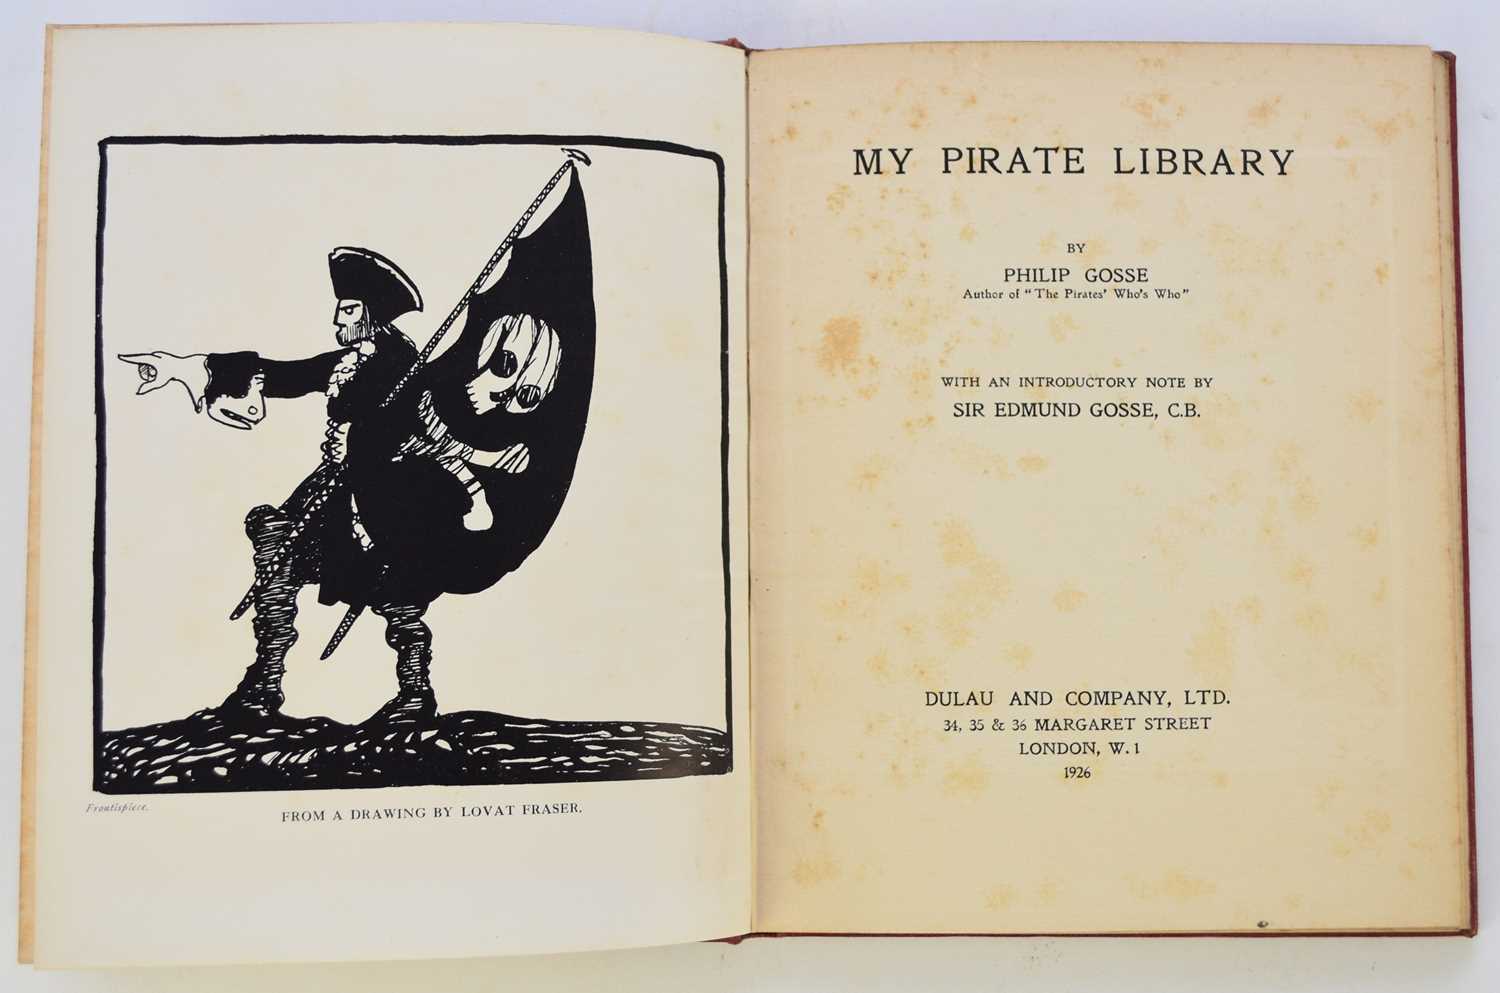 Lot 45 - GOSSE, Philip, My Pirate Library. 4to, 1st edition, 1926. One of 300 copies numbered and signed by the author. Red buckram with bevelled edges.